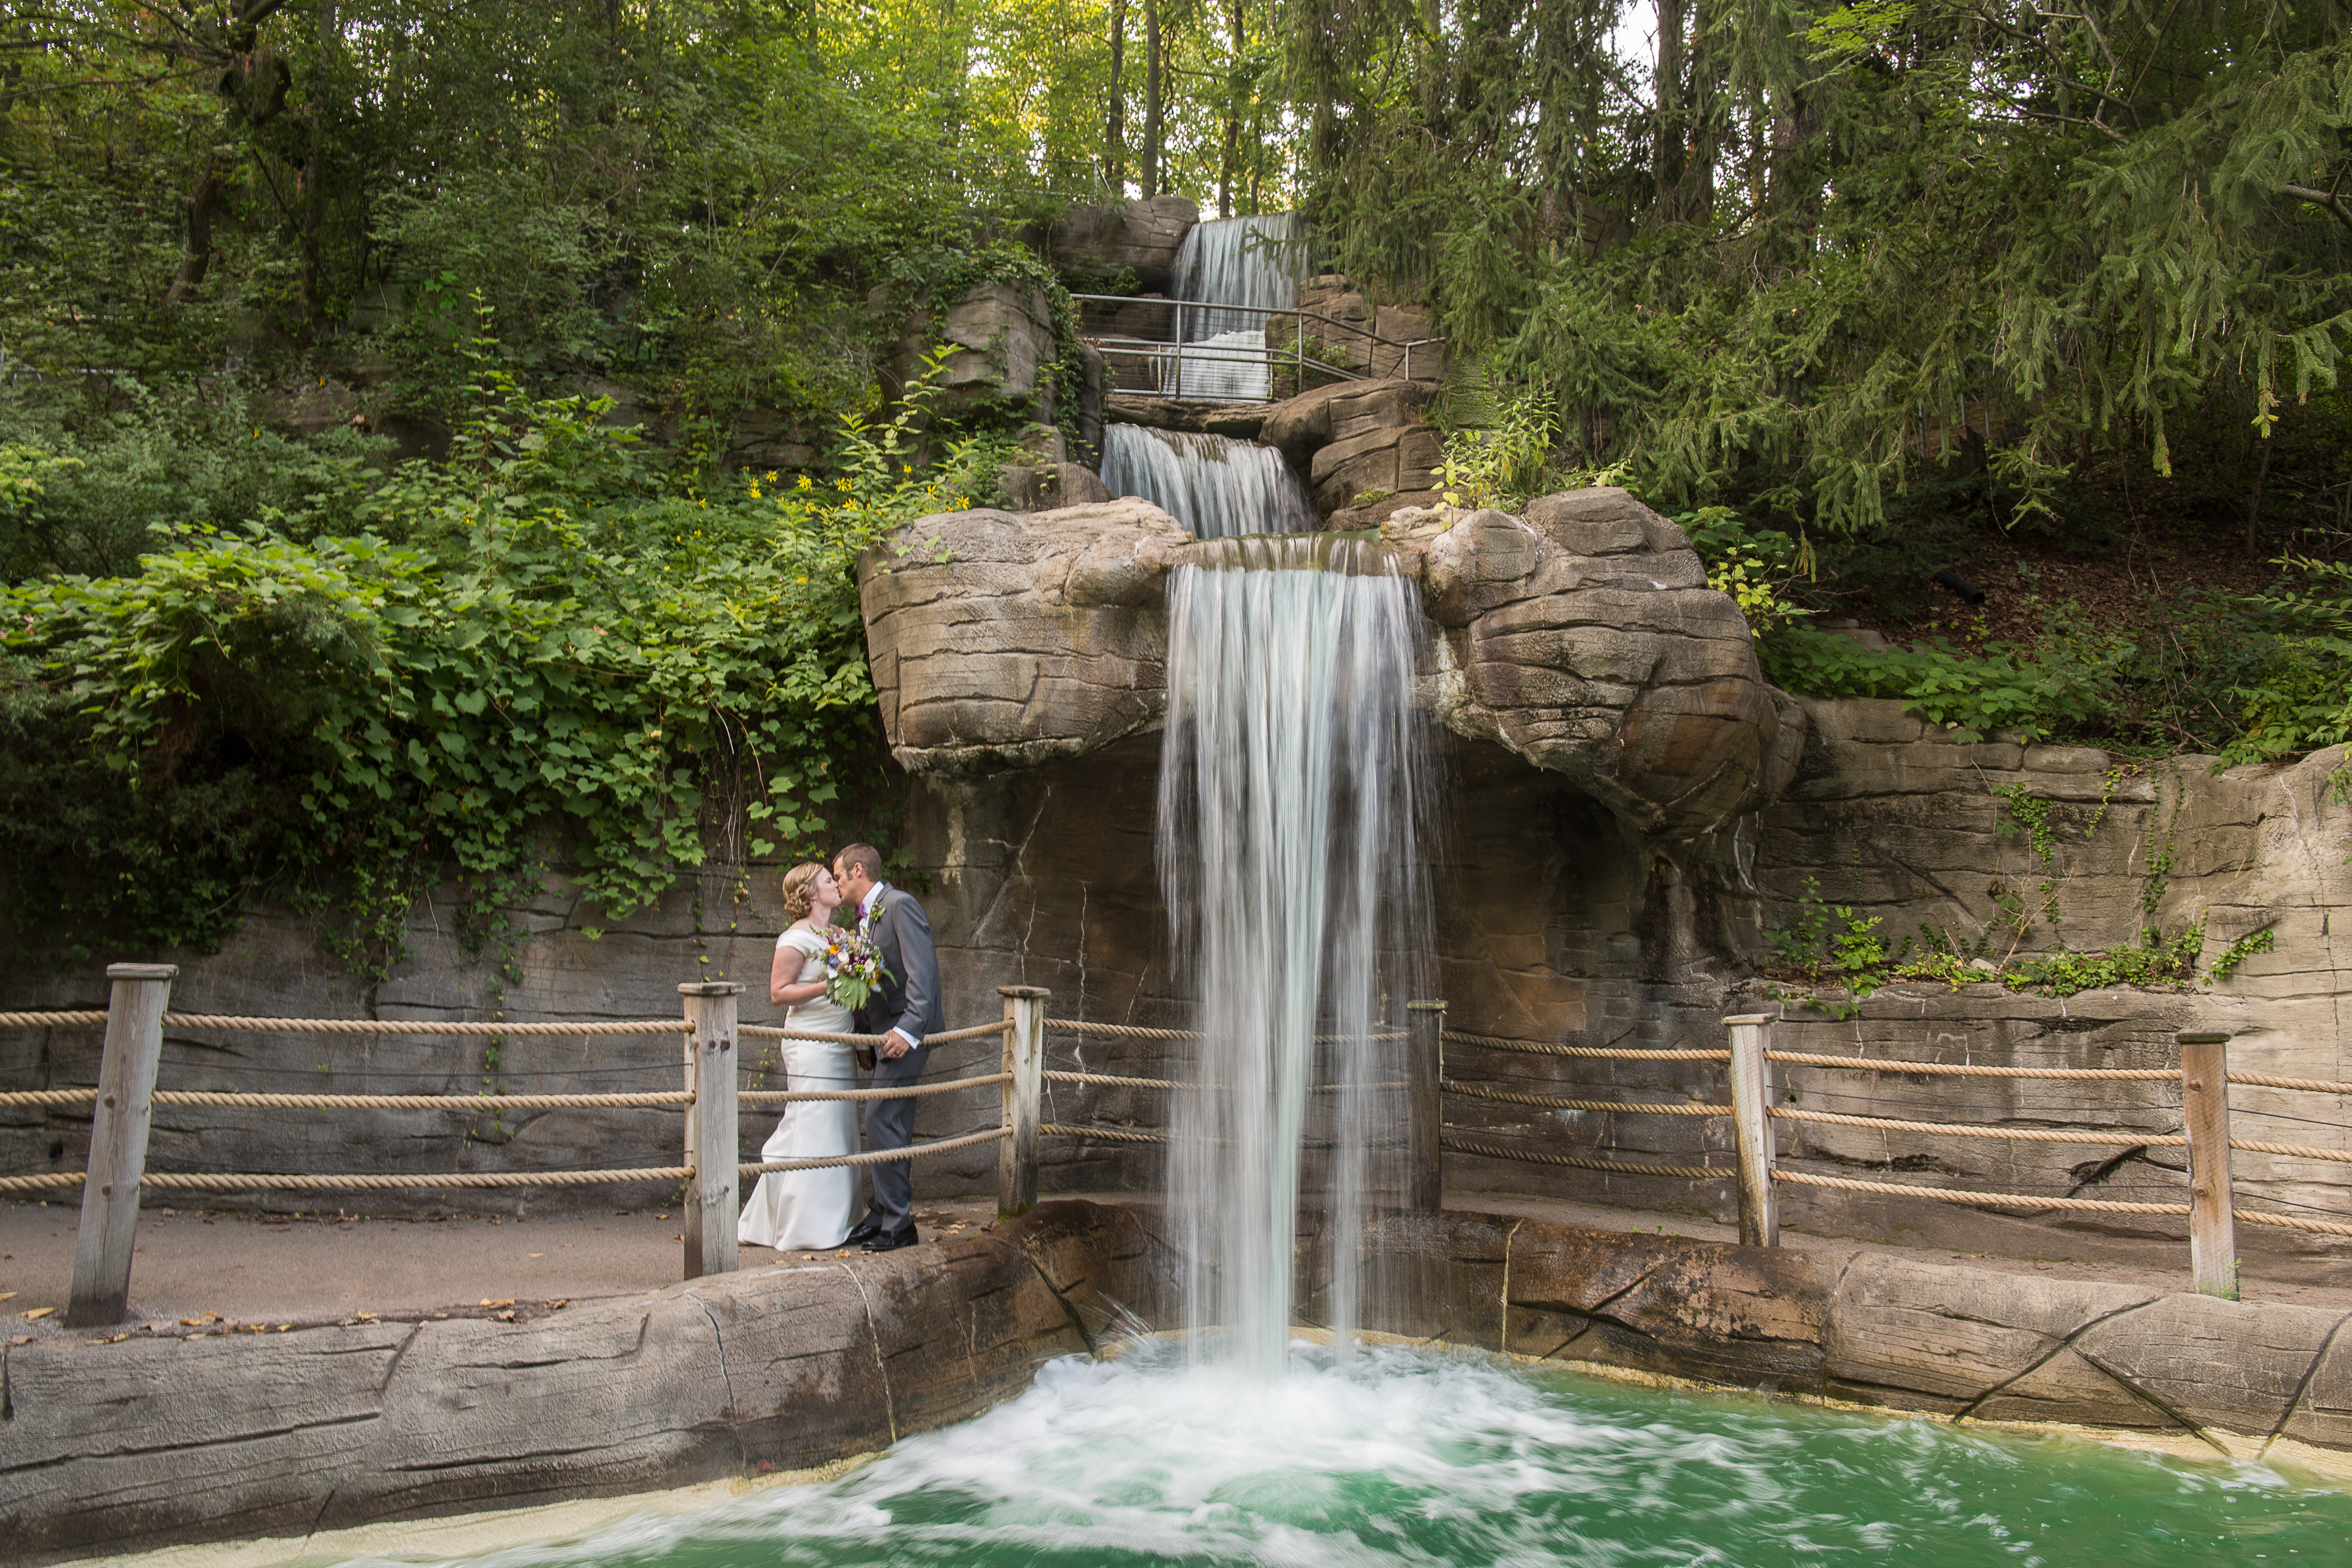 Elise & Chris stand under a waterfall on their wedding day